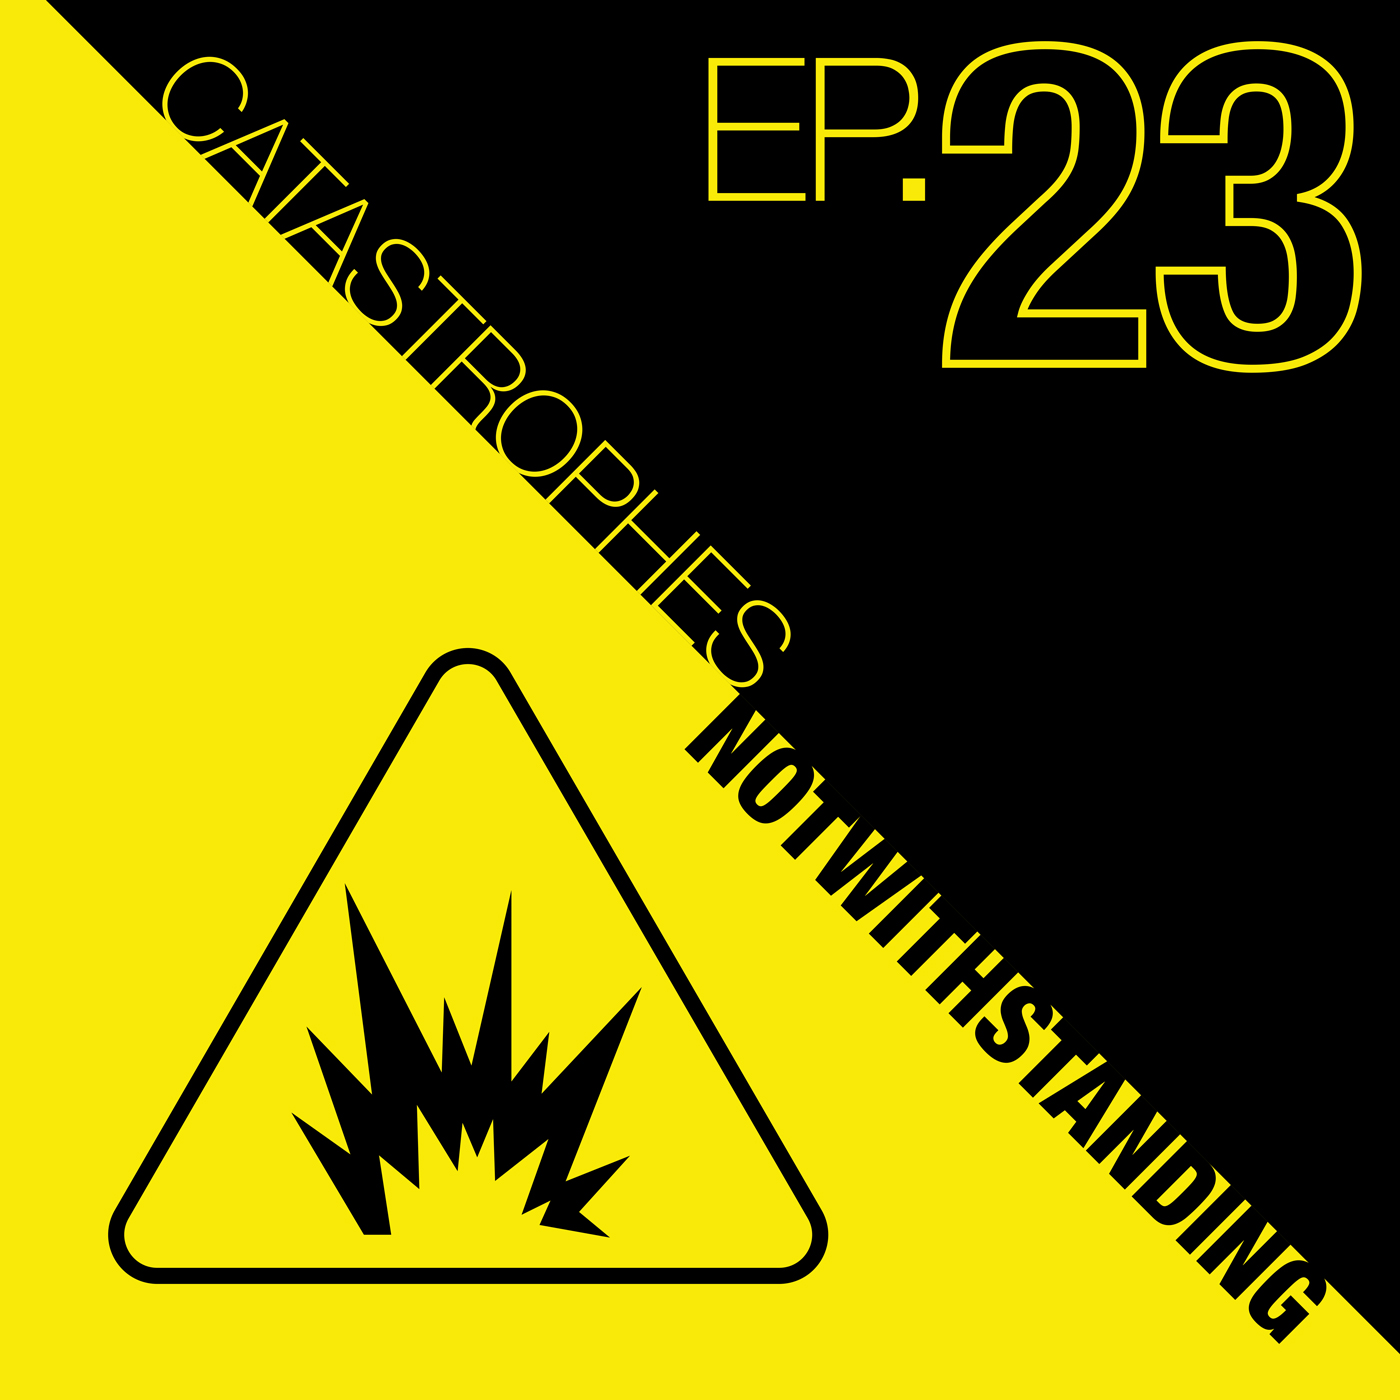 Cover Image of Catastrophes Notwithstanding Episode 23